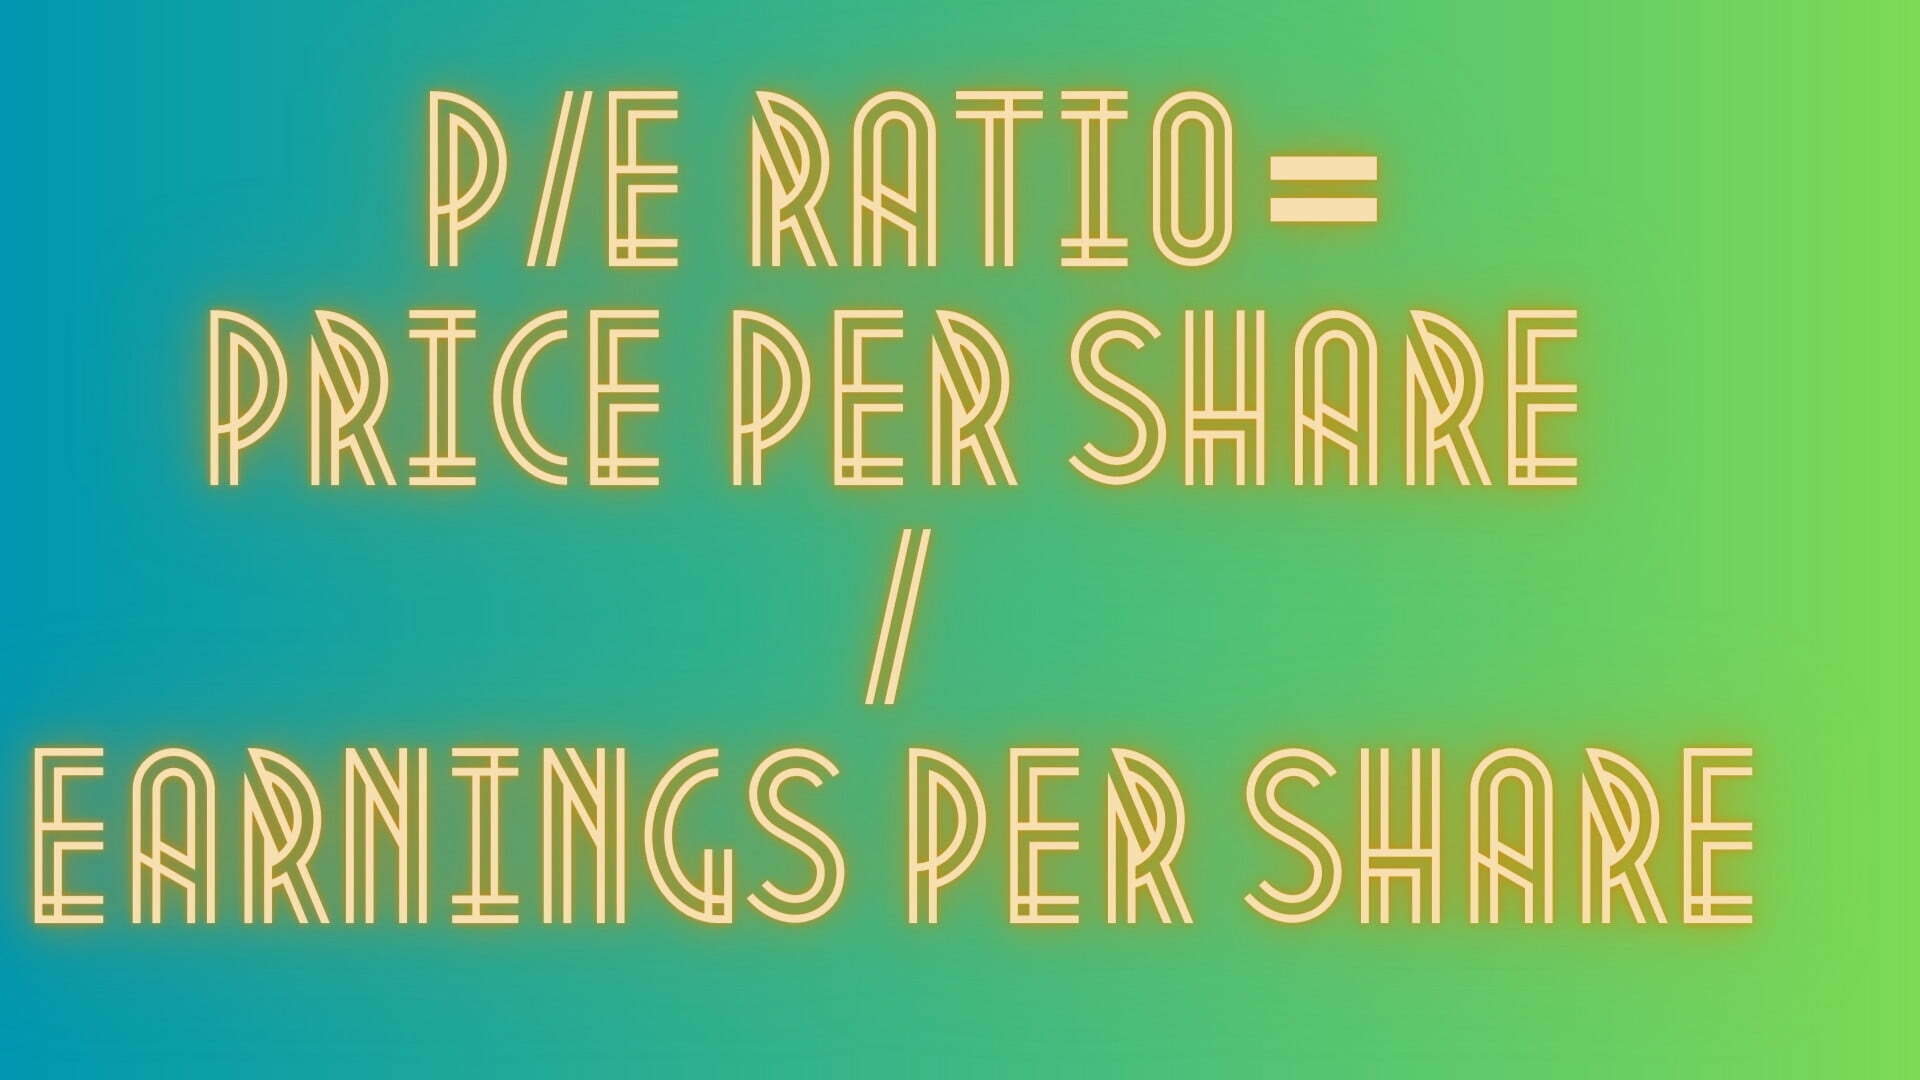 Price To Earnings Formula: P/E Ratio = Price Per Share / Earnings Per Share How To Calculate The P/E Ratio